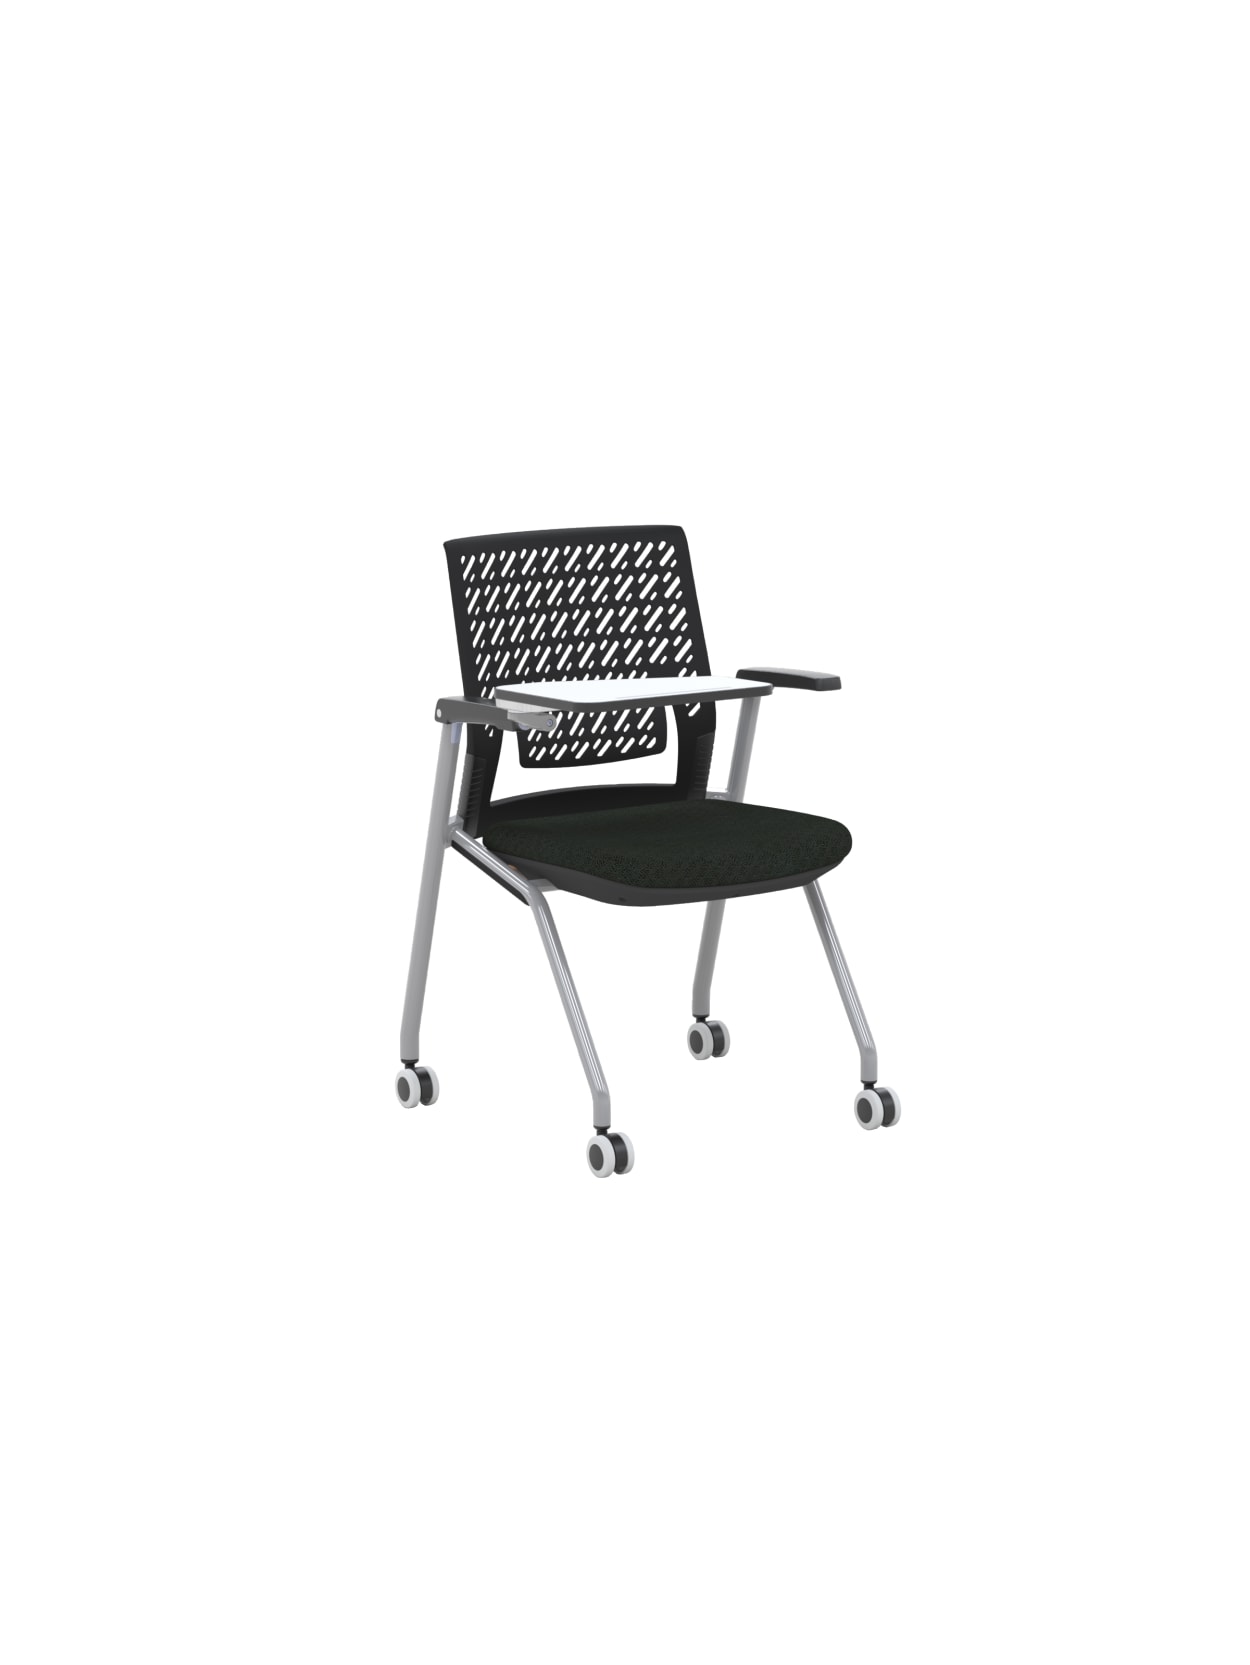 Combination Fishing Training Chair Integrated Waist Chair Dining Room Computer Chair Lunch Break Chair Style Lightweight Table and Chair Nordic